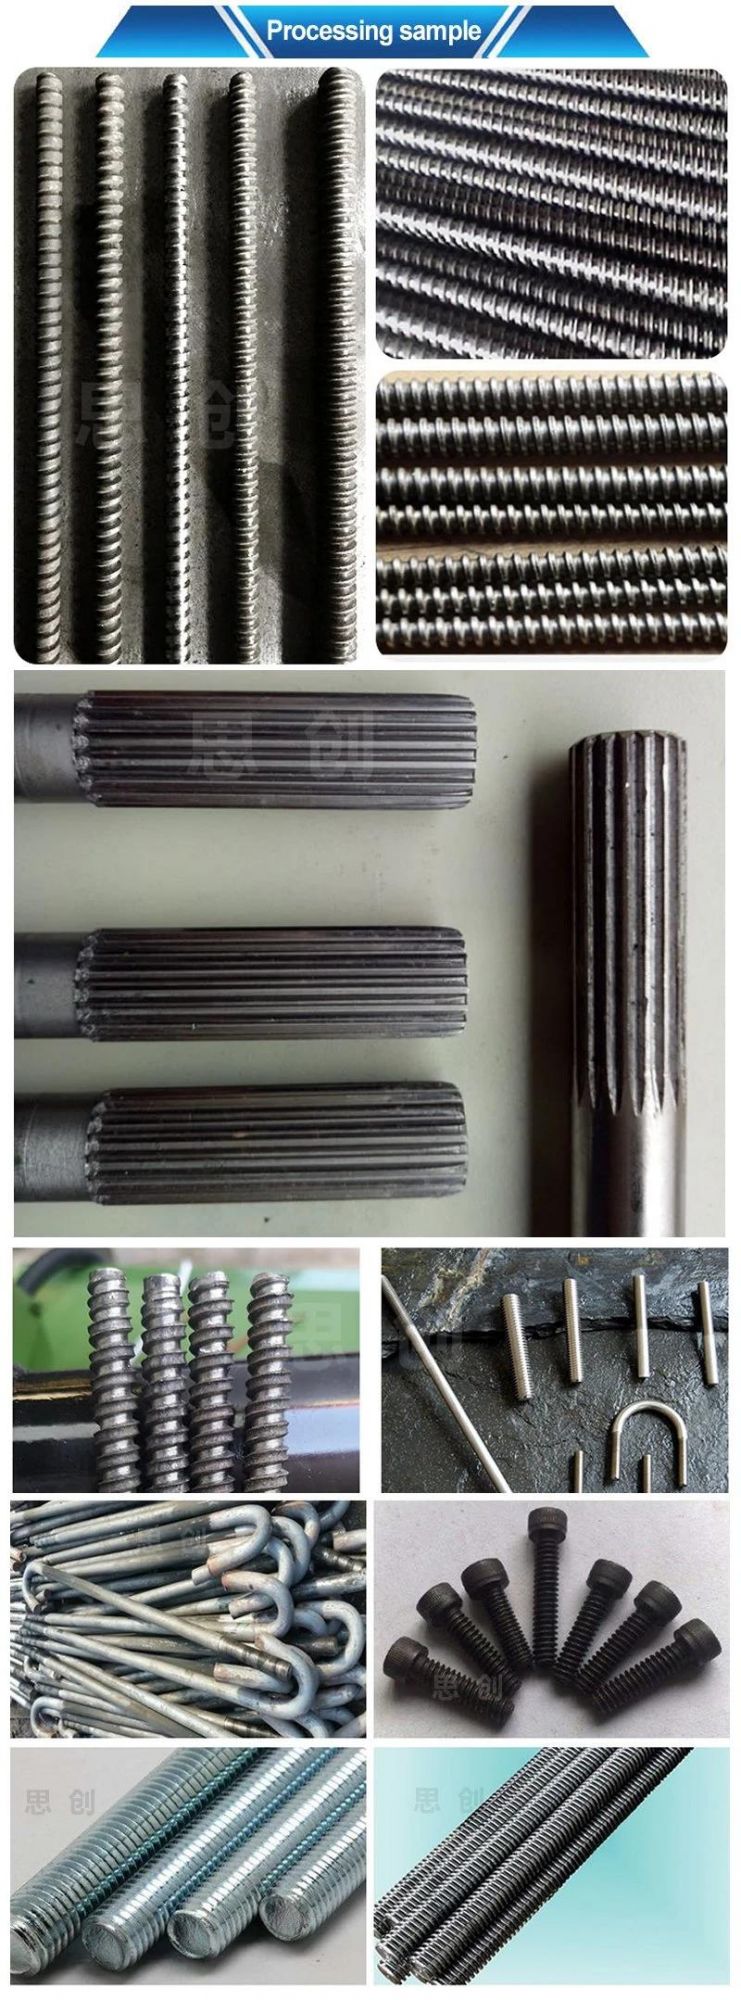 Easy to Operate Z285-650 Thread Rolling Machine Screw Thread Rolling Machine